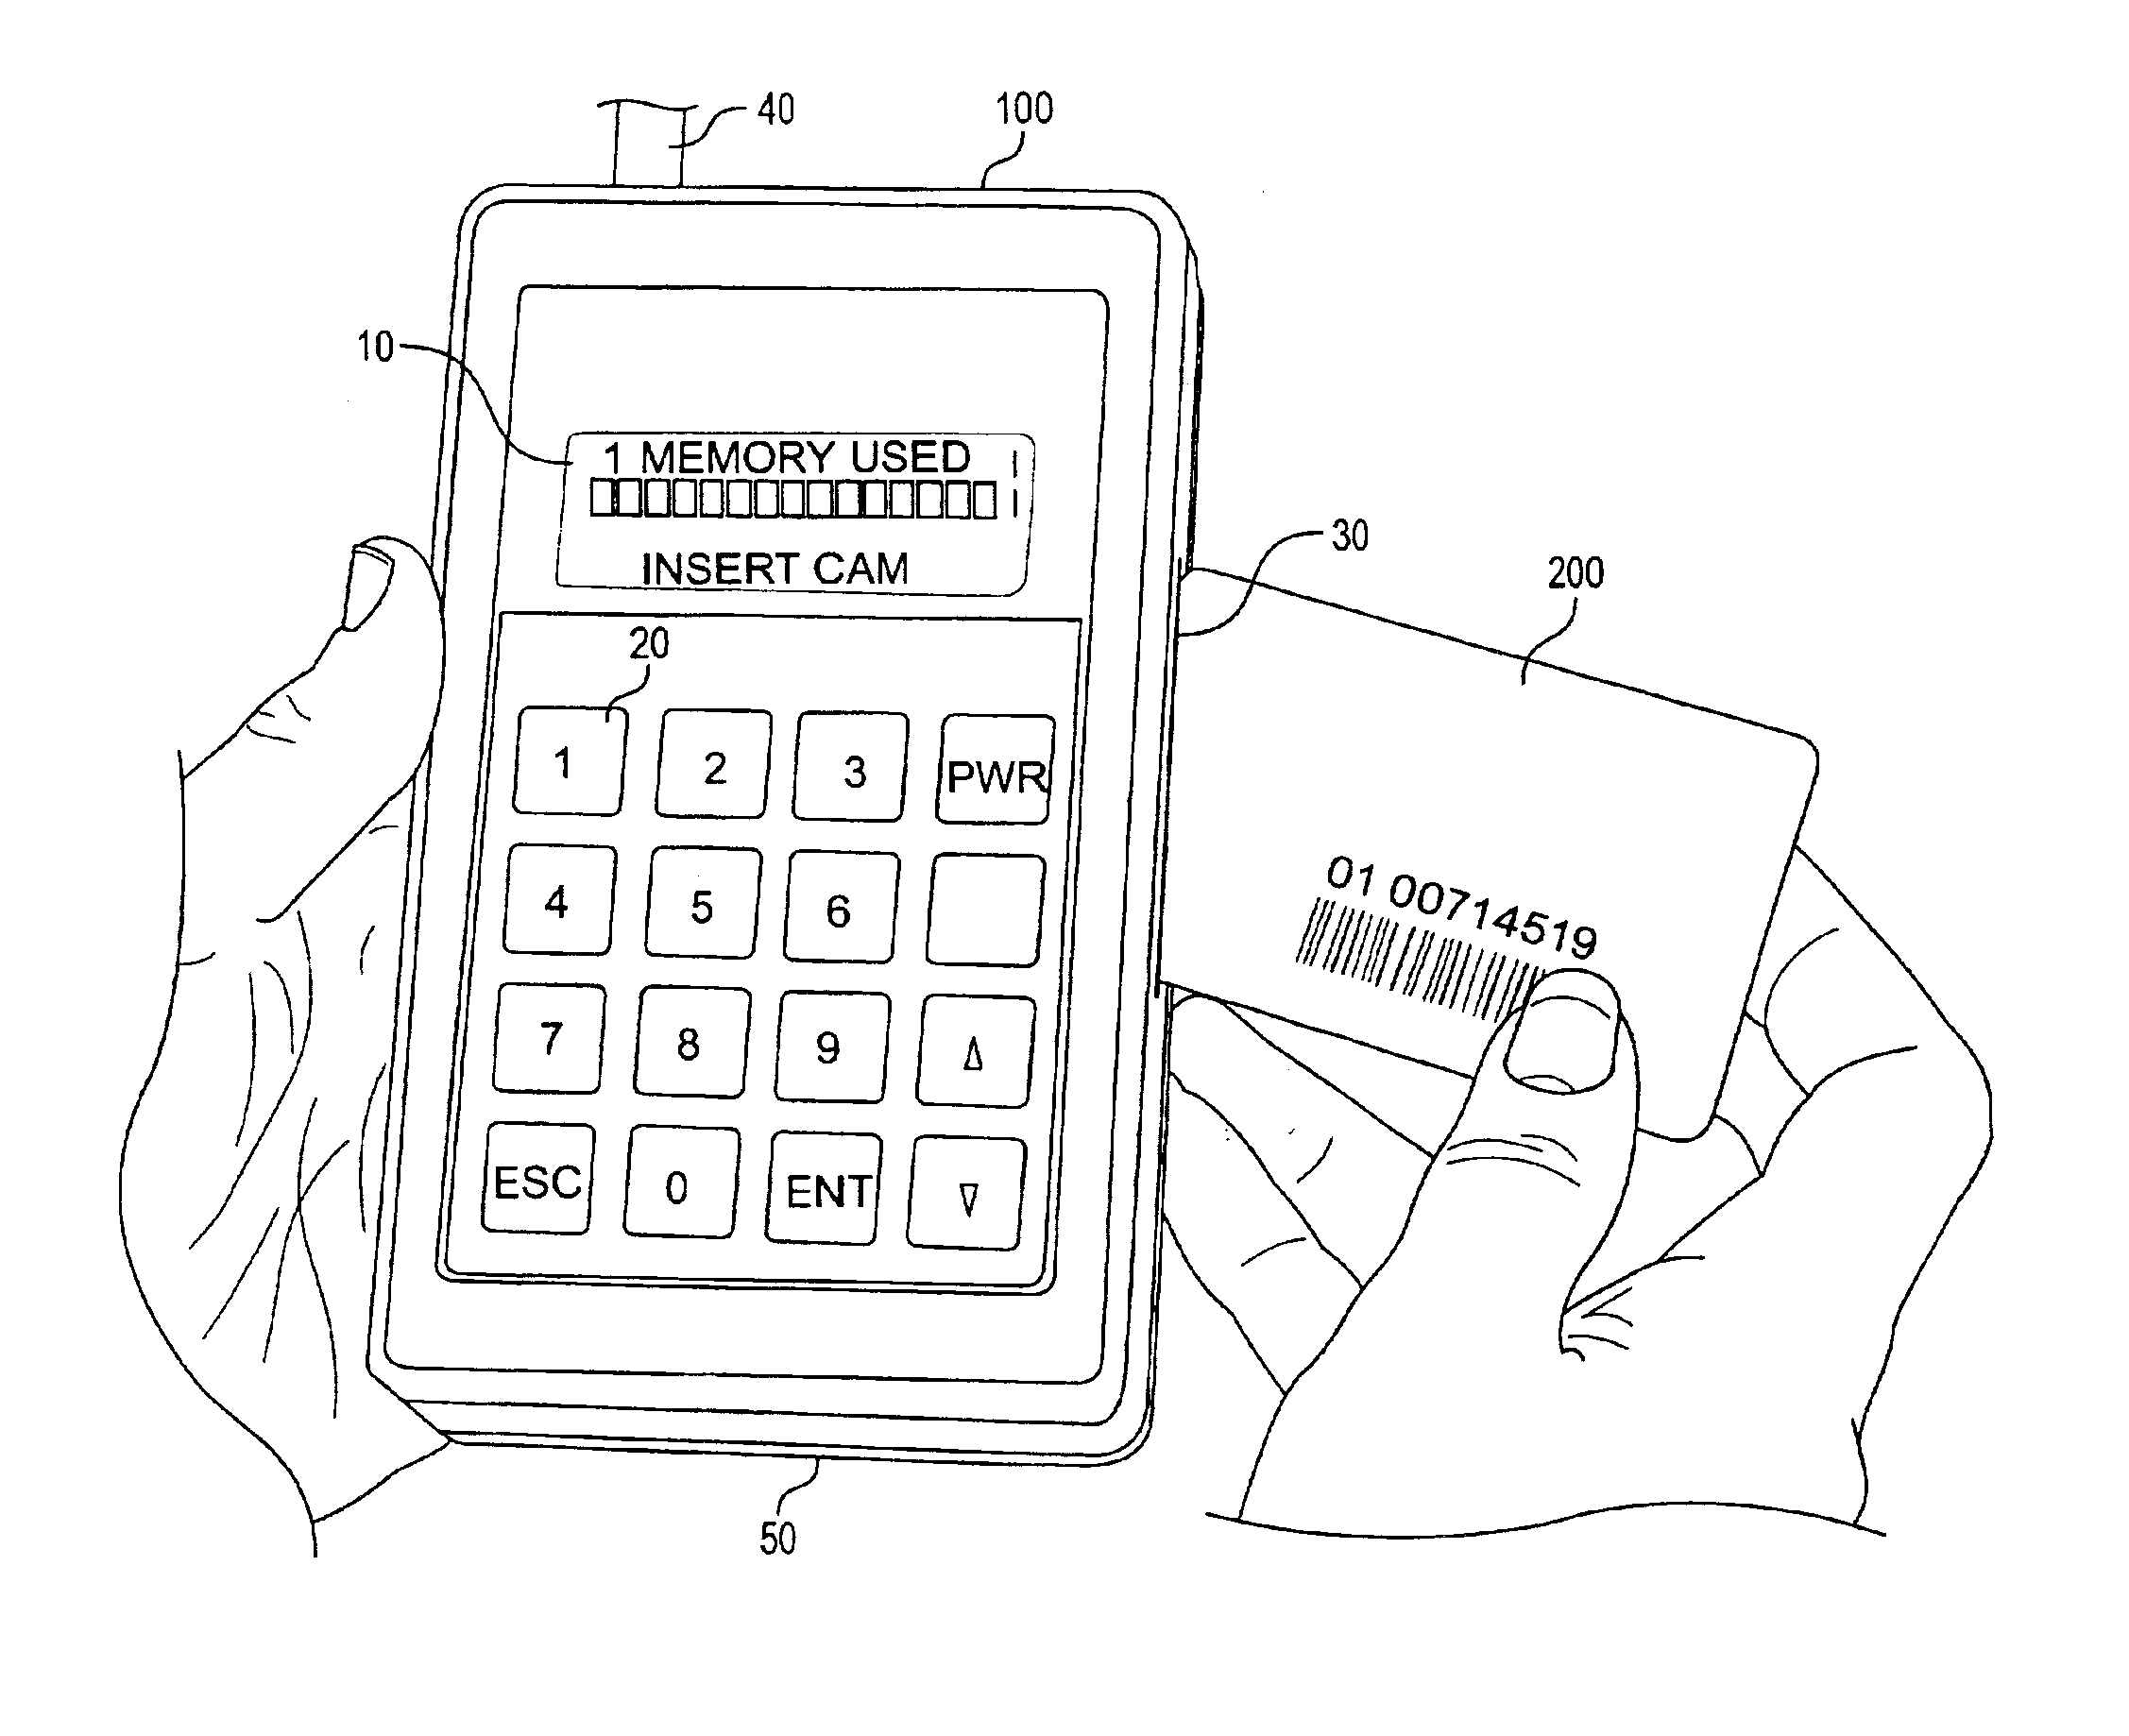 System for testing, verifying legitimacy of smart card in-situ and for storing data therein